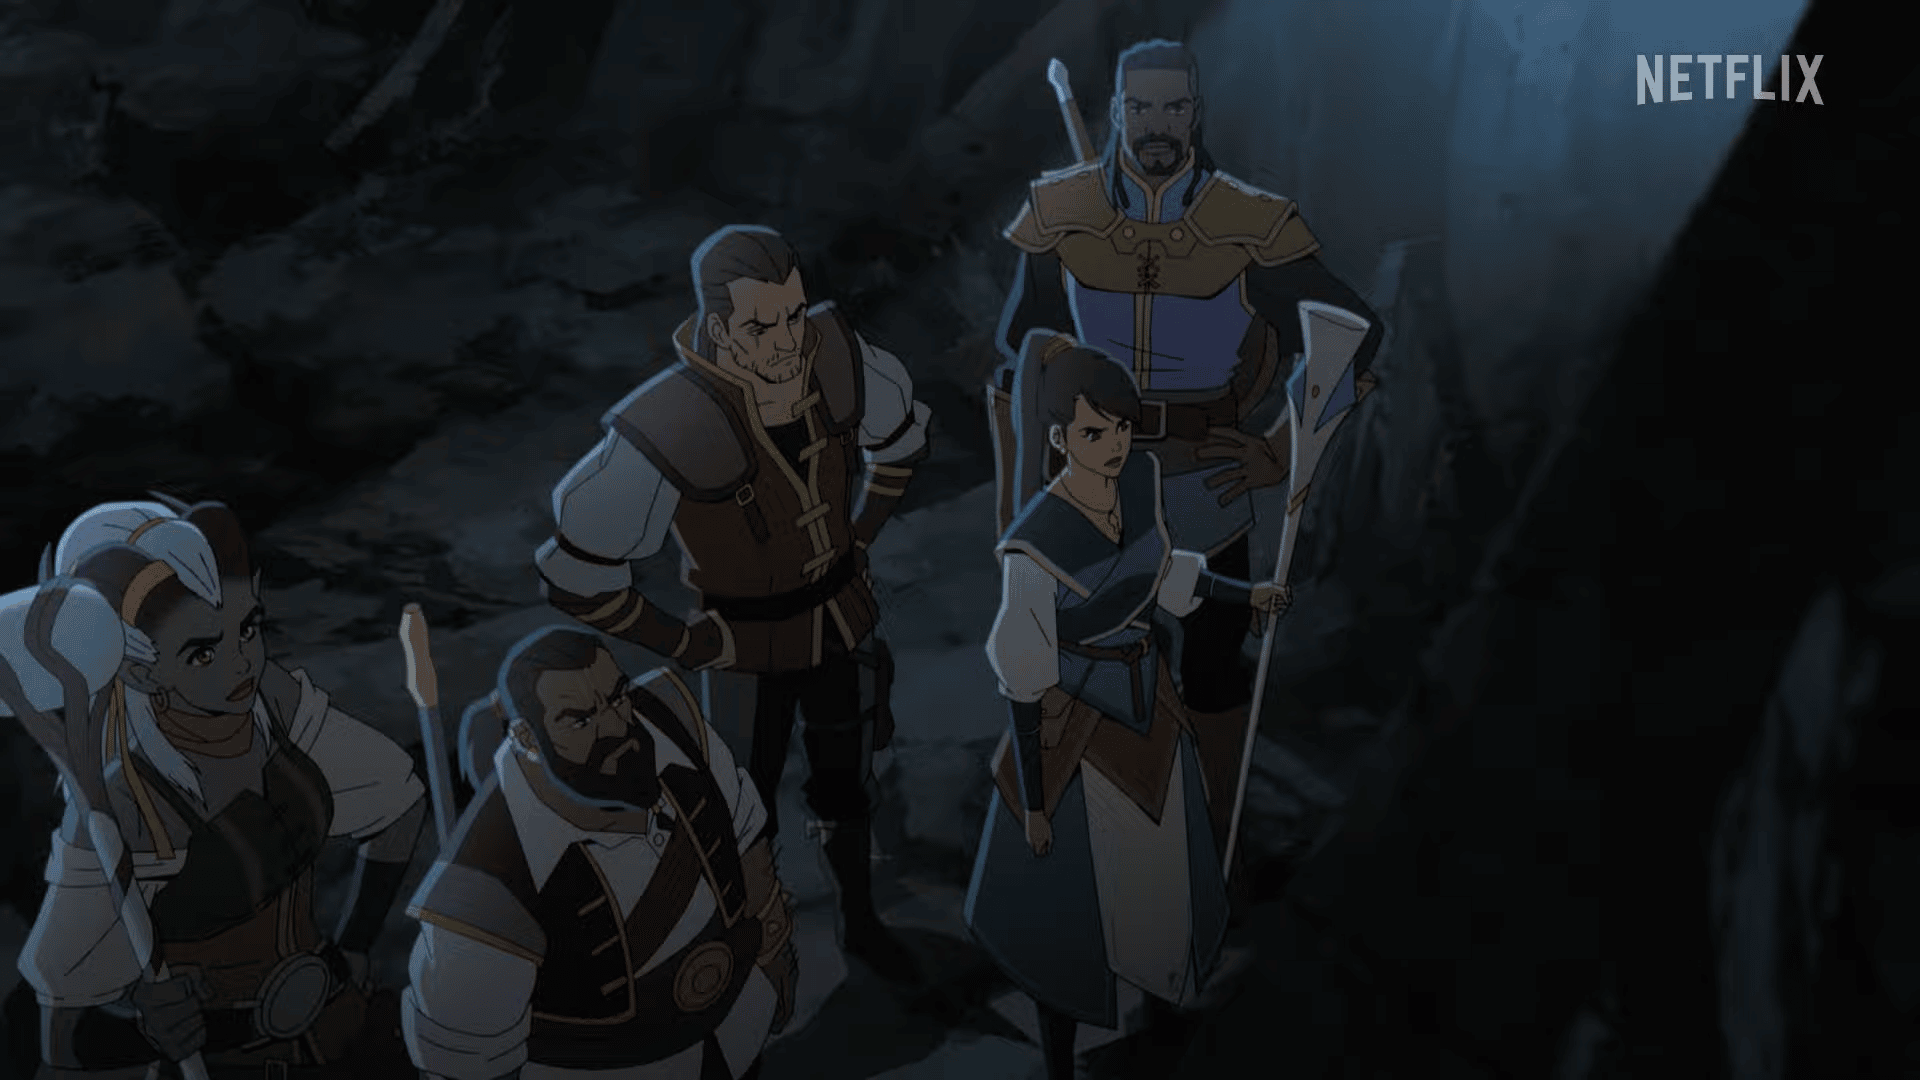 Dragon Age: Absolution Netflix Show Announced; Debuts December 2022